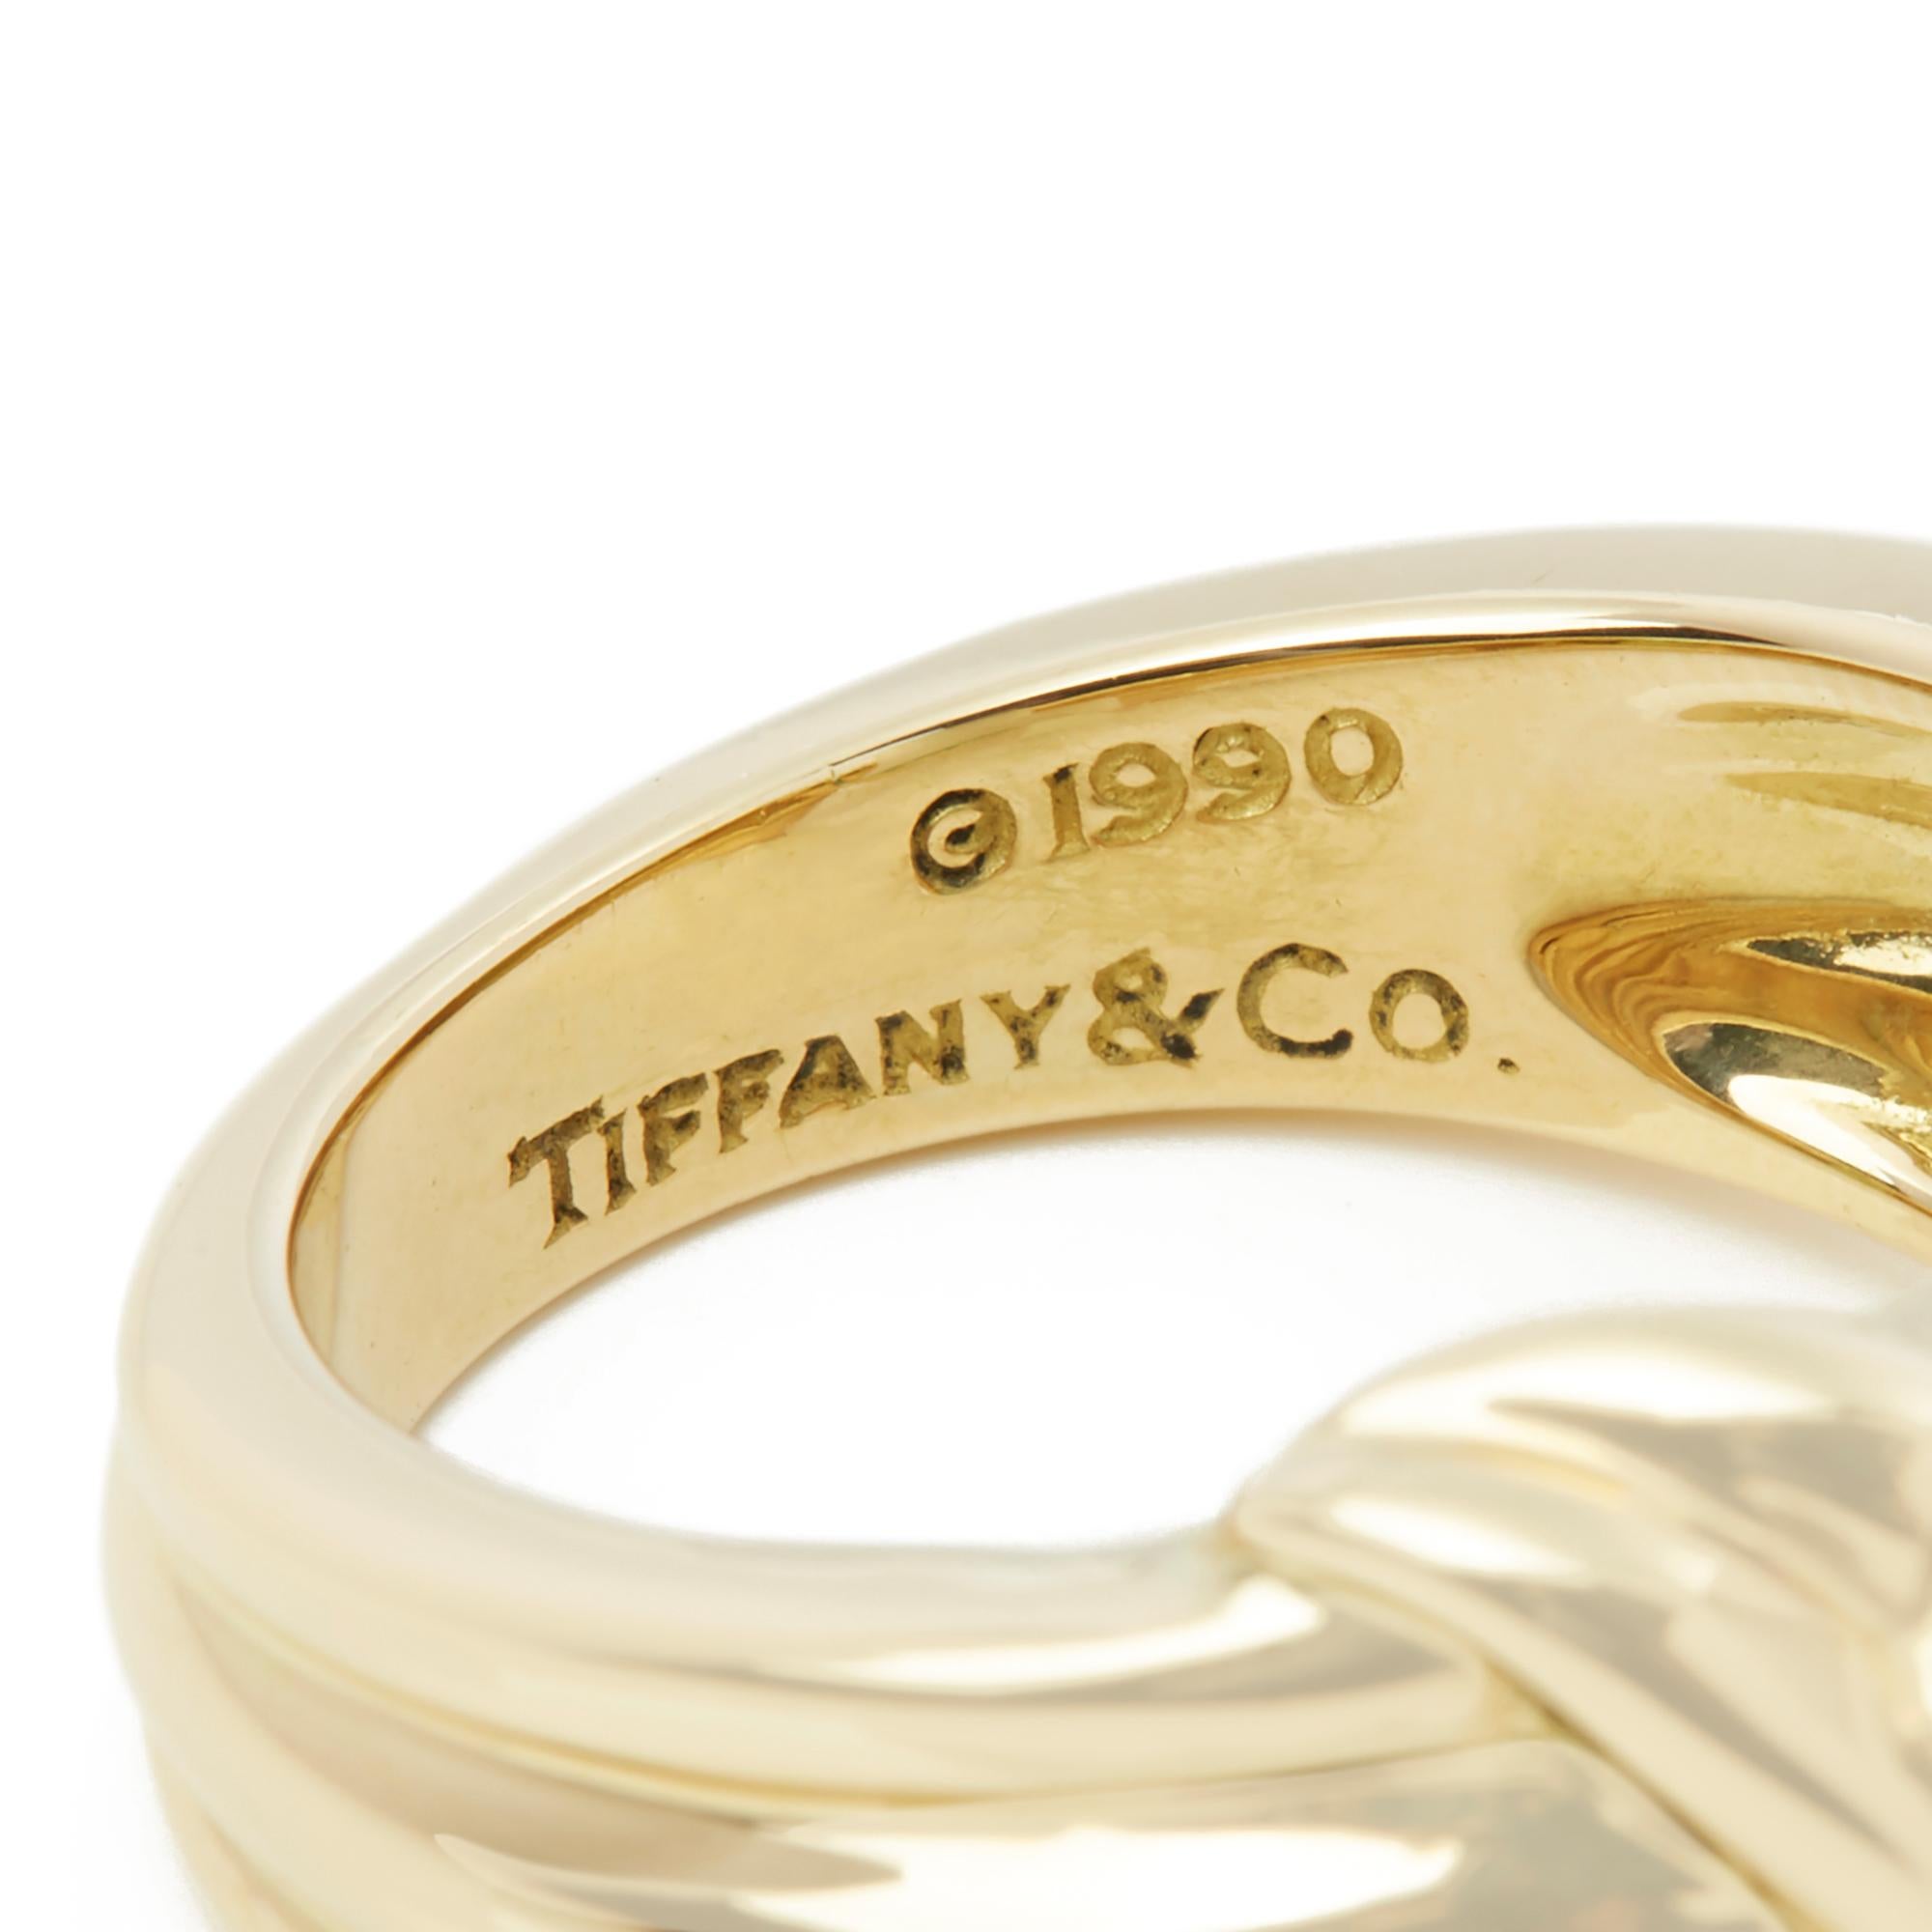 Tiffany & Co. 18 Karat Yellow Gold Colombian Emerald Cocktail Ring 4